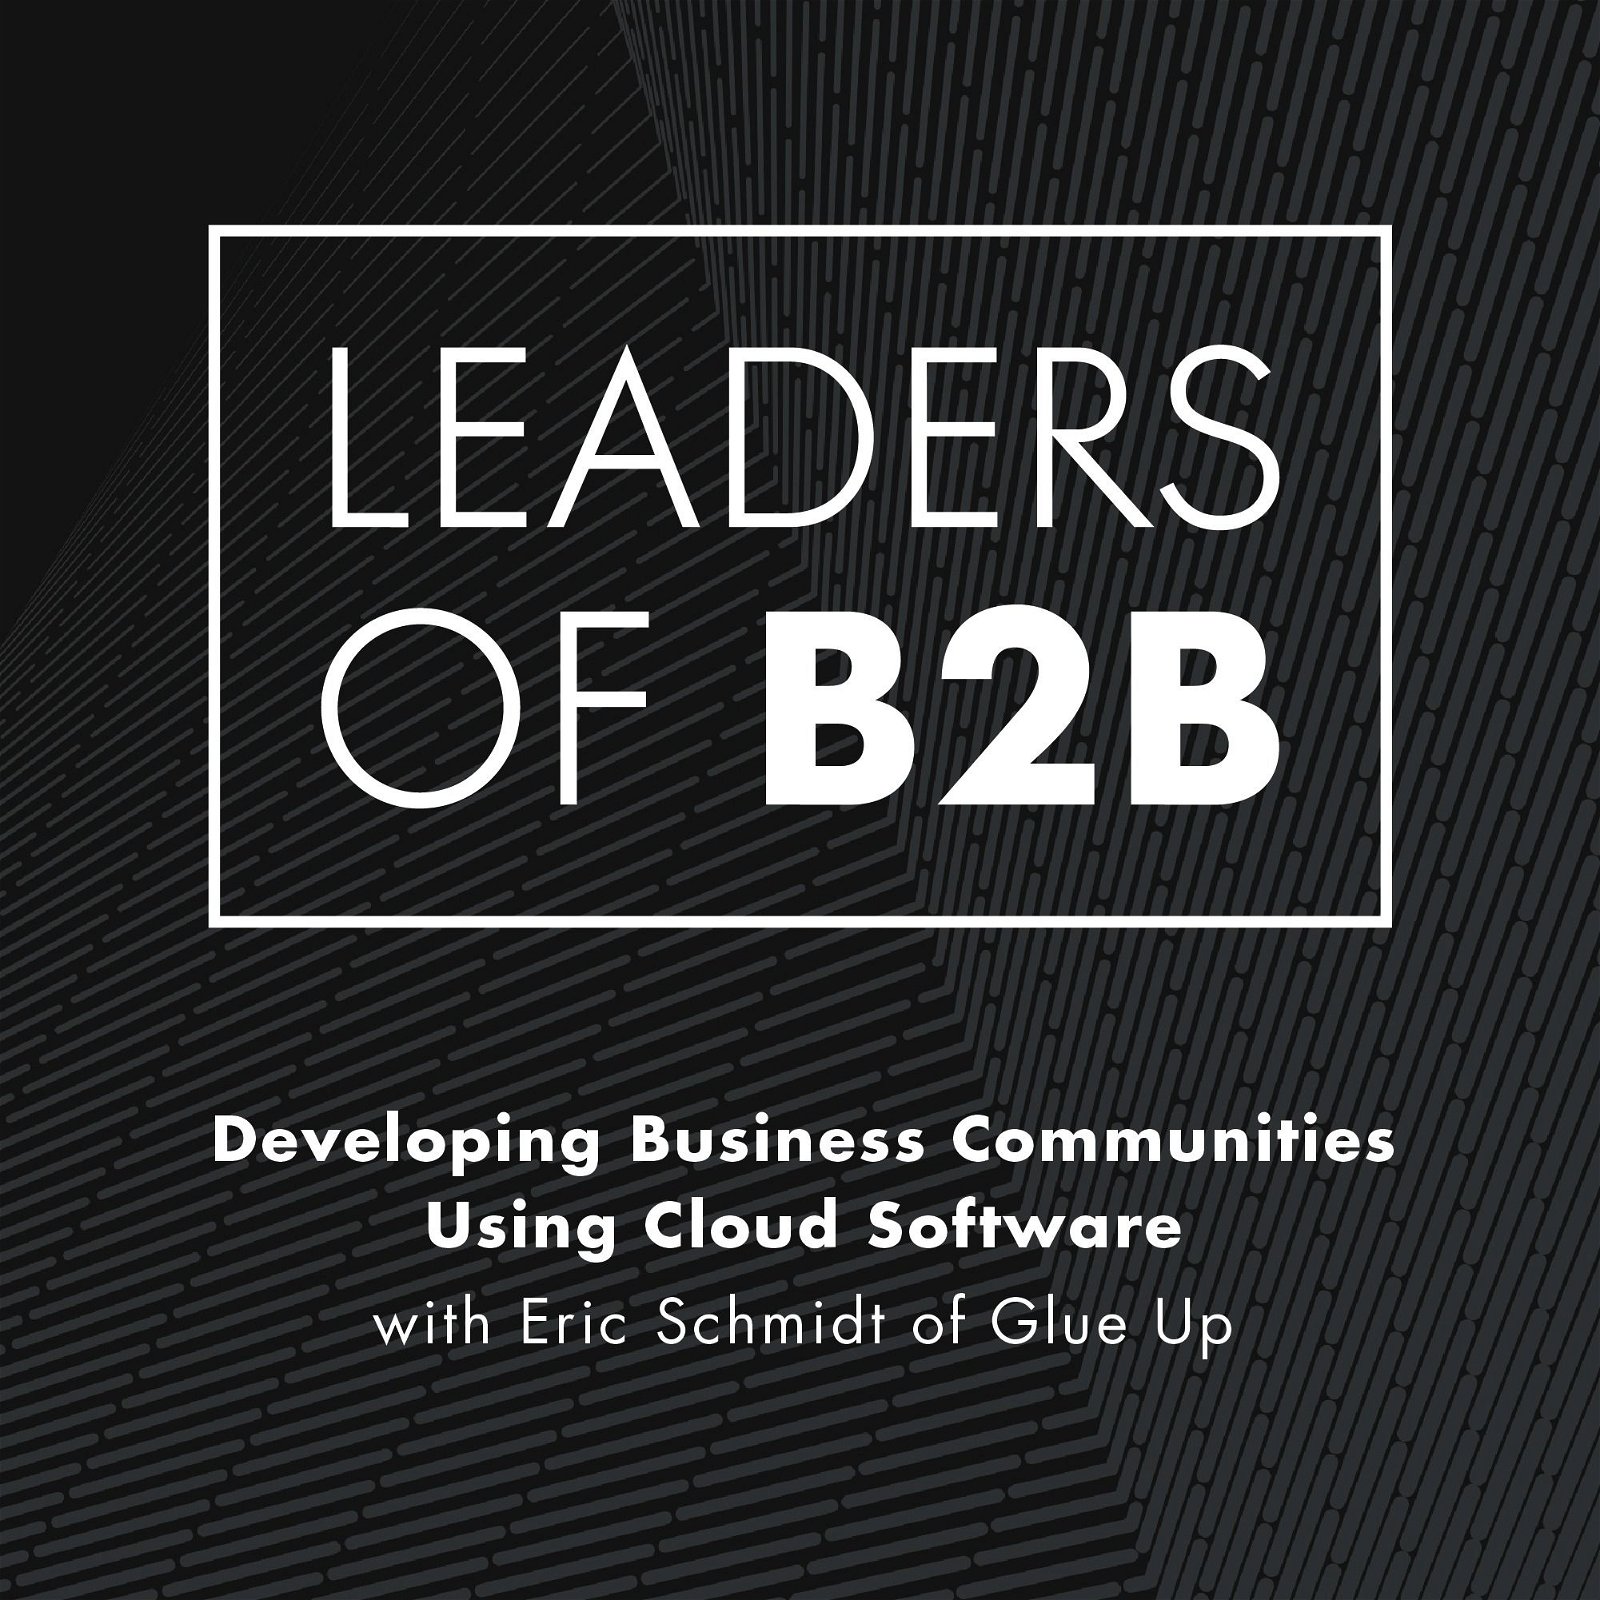 Developing Business Communities Using Cloud Software with Eric Schmidt of Glue Up